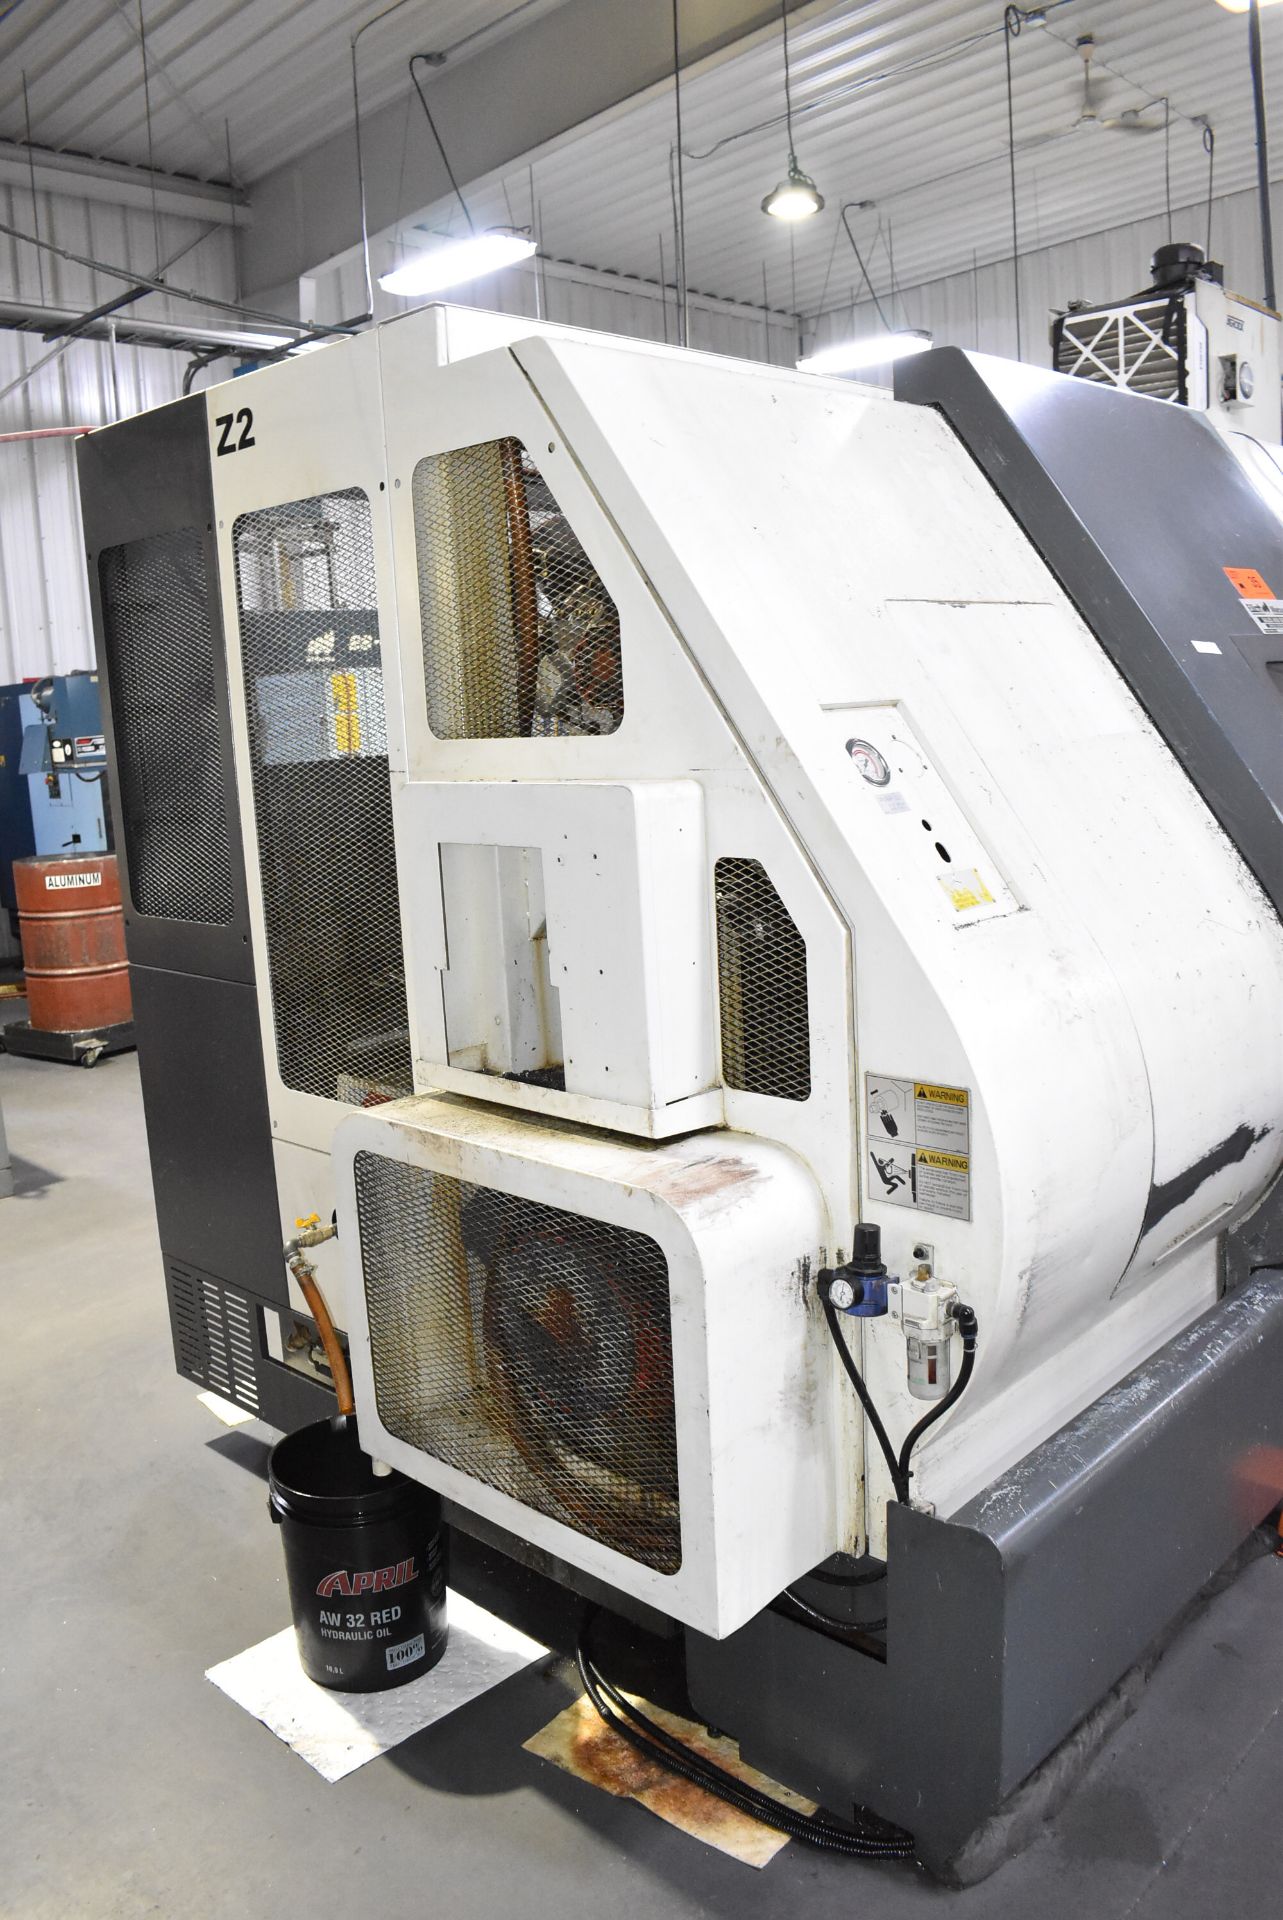 NAKAMURA-TOME (2007) WT-300 MMYS 7-AXIS OPPOSED SPINDLE AND TWIN TURRET CNC MULTI-TASKING CENTER - Image 11 of 15